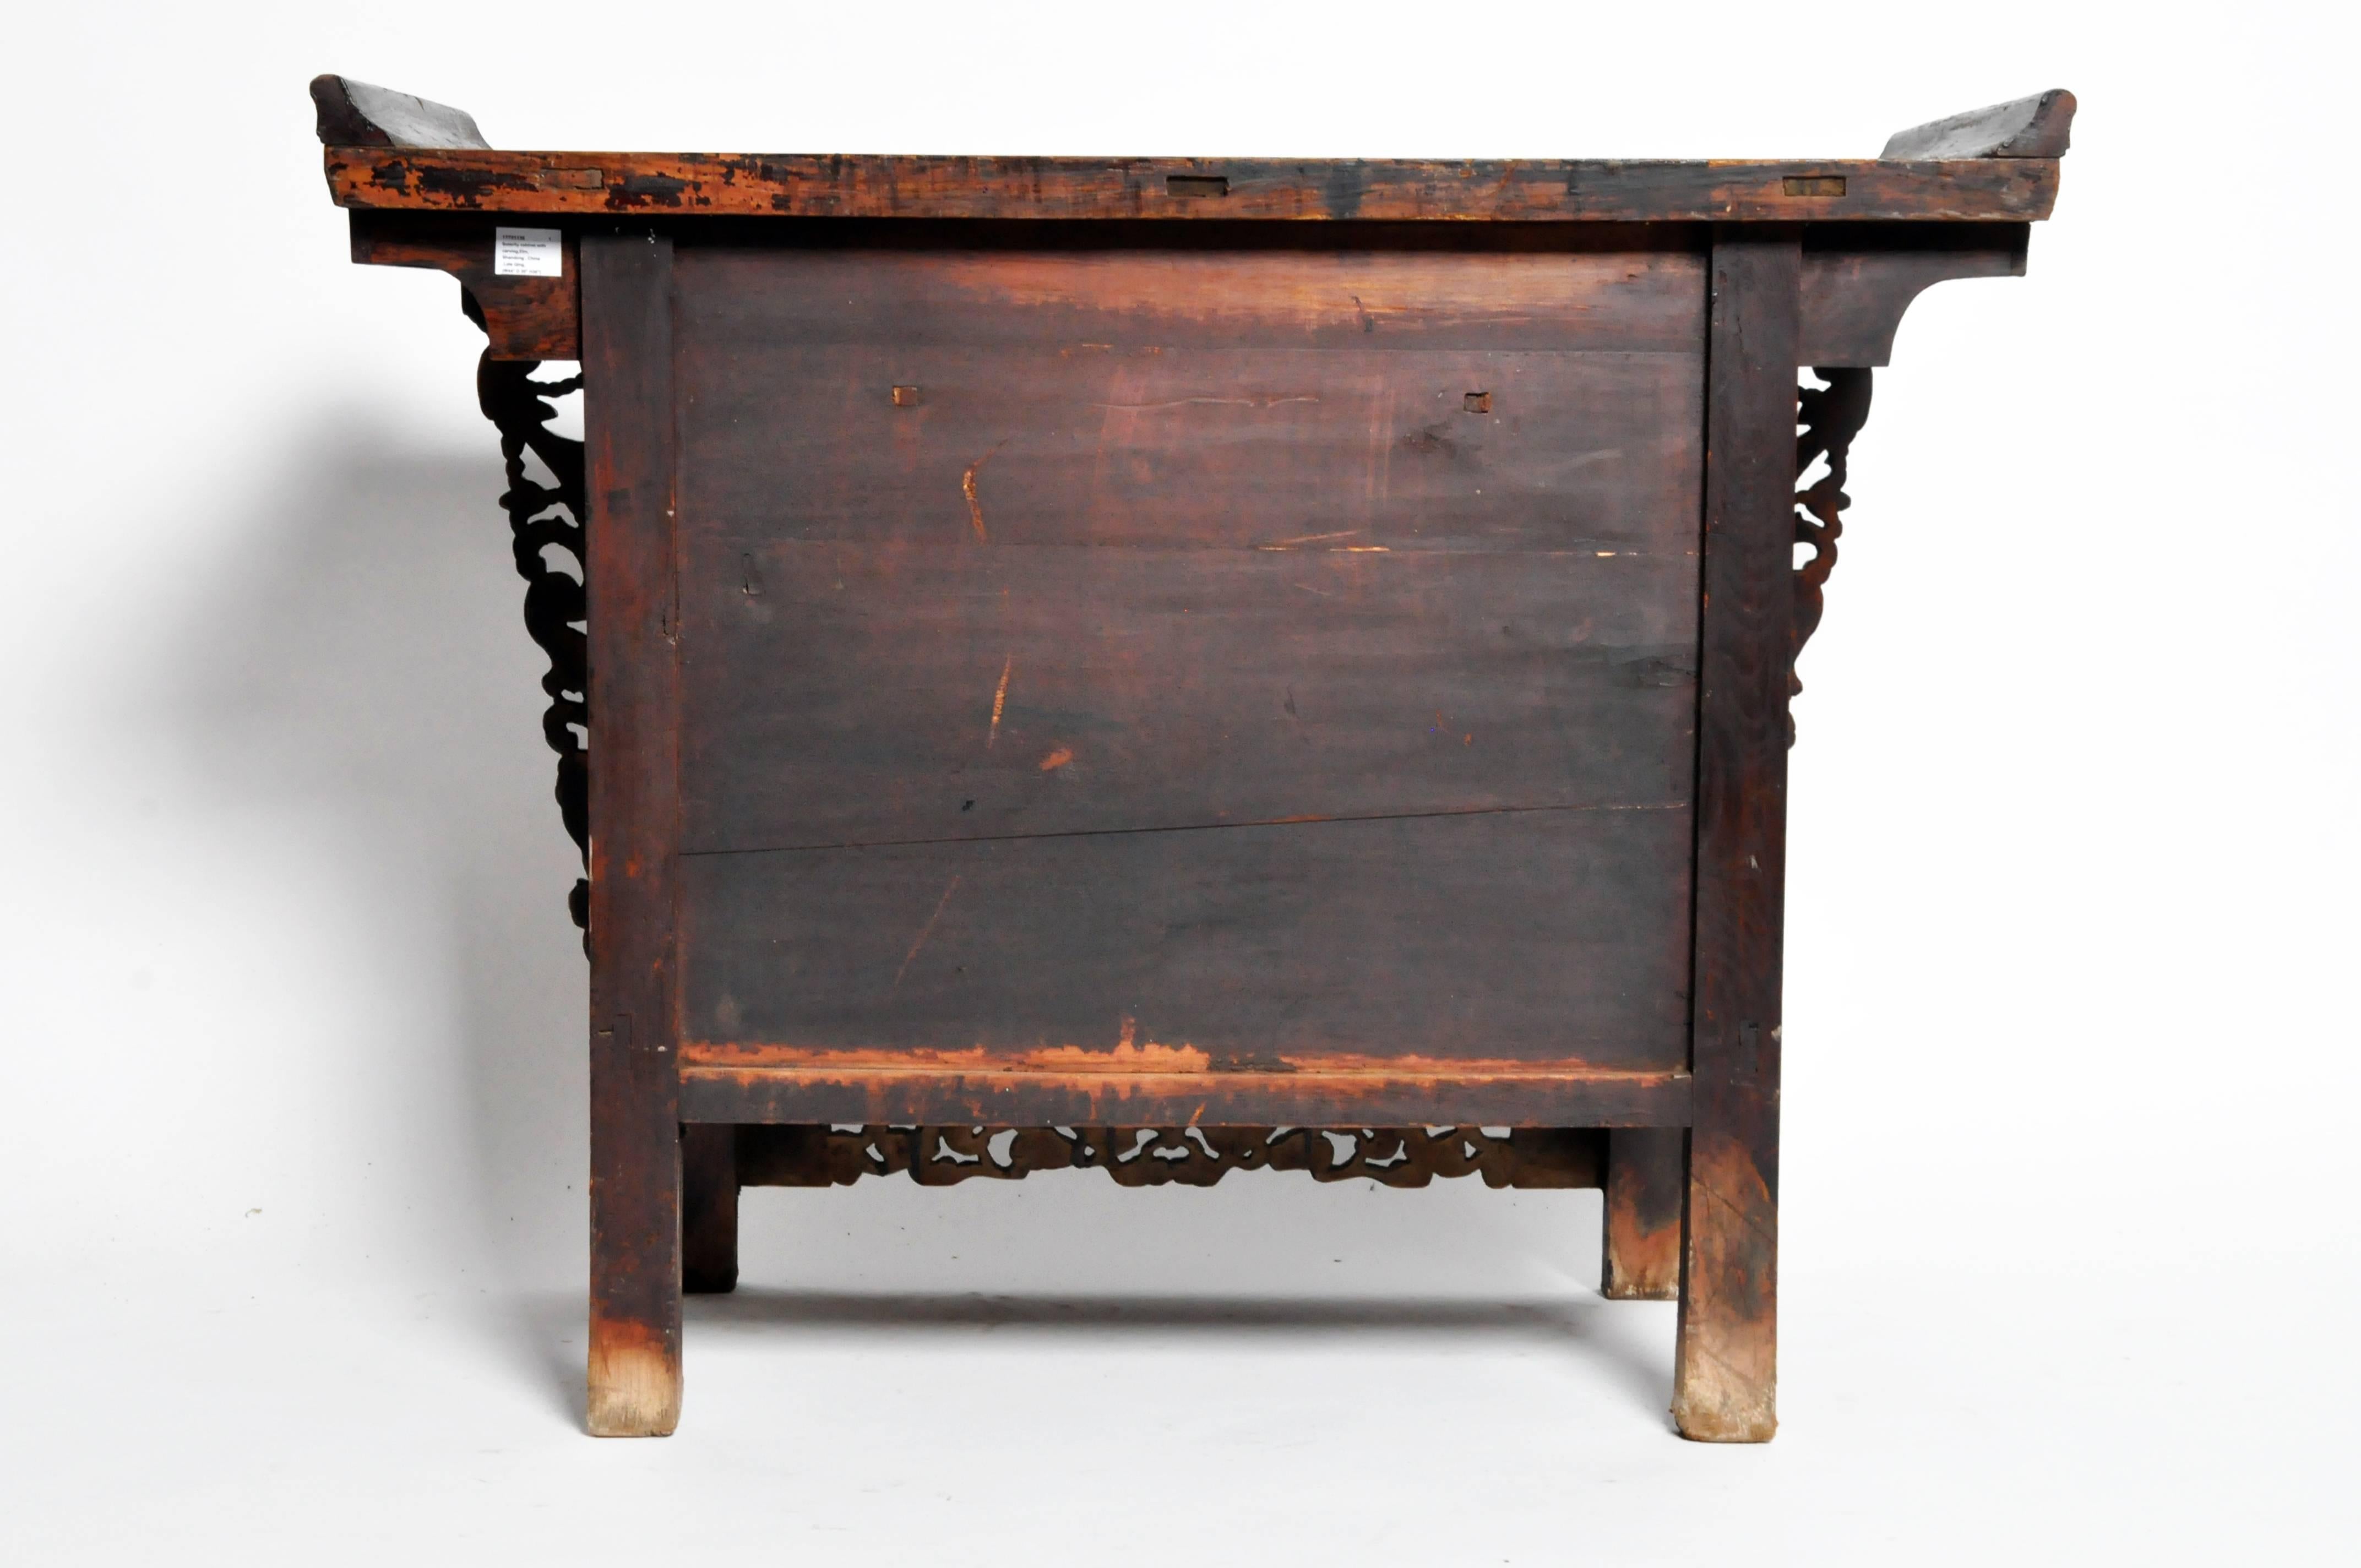 This handsome chest is from Shandong, China and made from elmwood circa late Qing dynasty. The piece features one drawers, a sliding door that exposes a compartment for additional storage, intricate hard-carved details, and original patina.